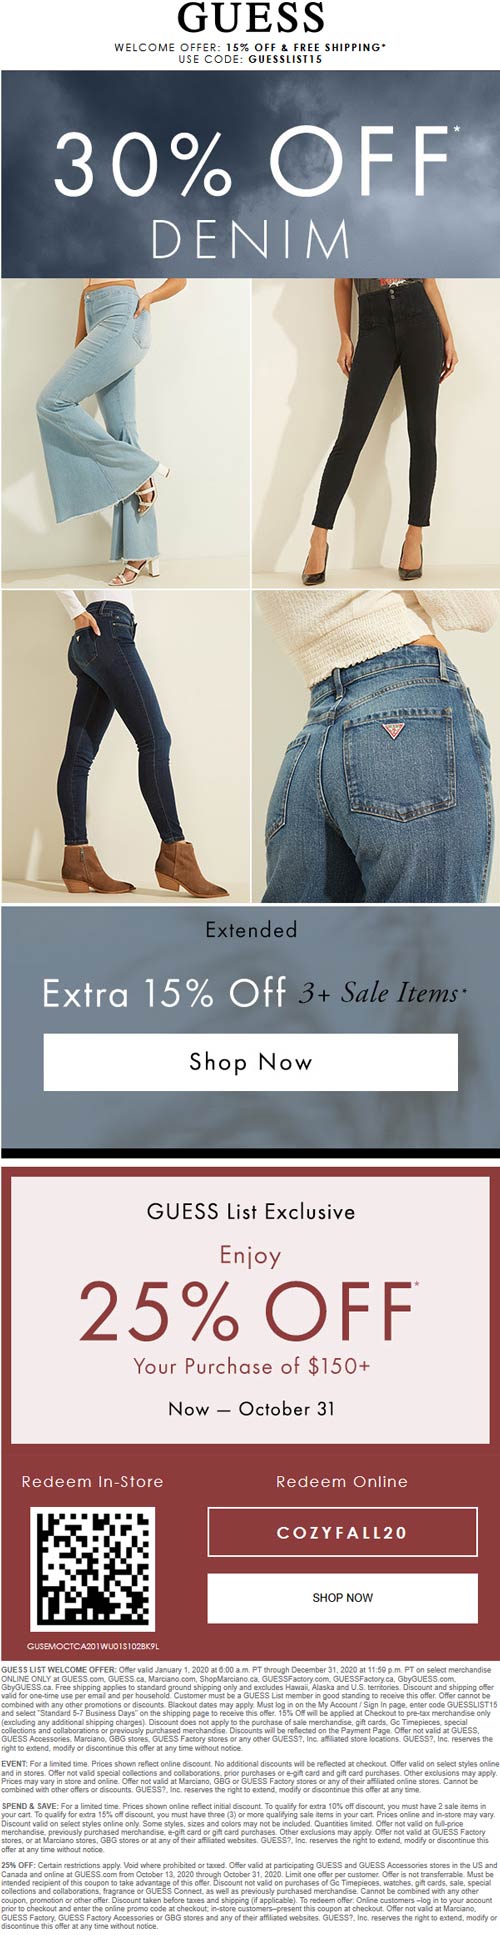 GUESS stores Coupon  30% off denim & 25% off $150 at GUESS, or online via promo code COZYFALL20 #guess 